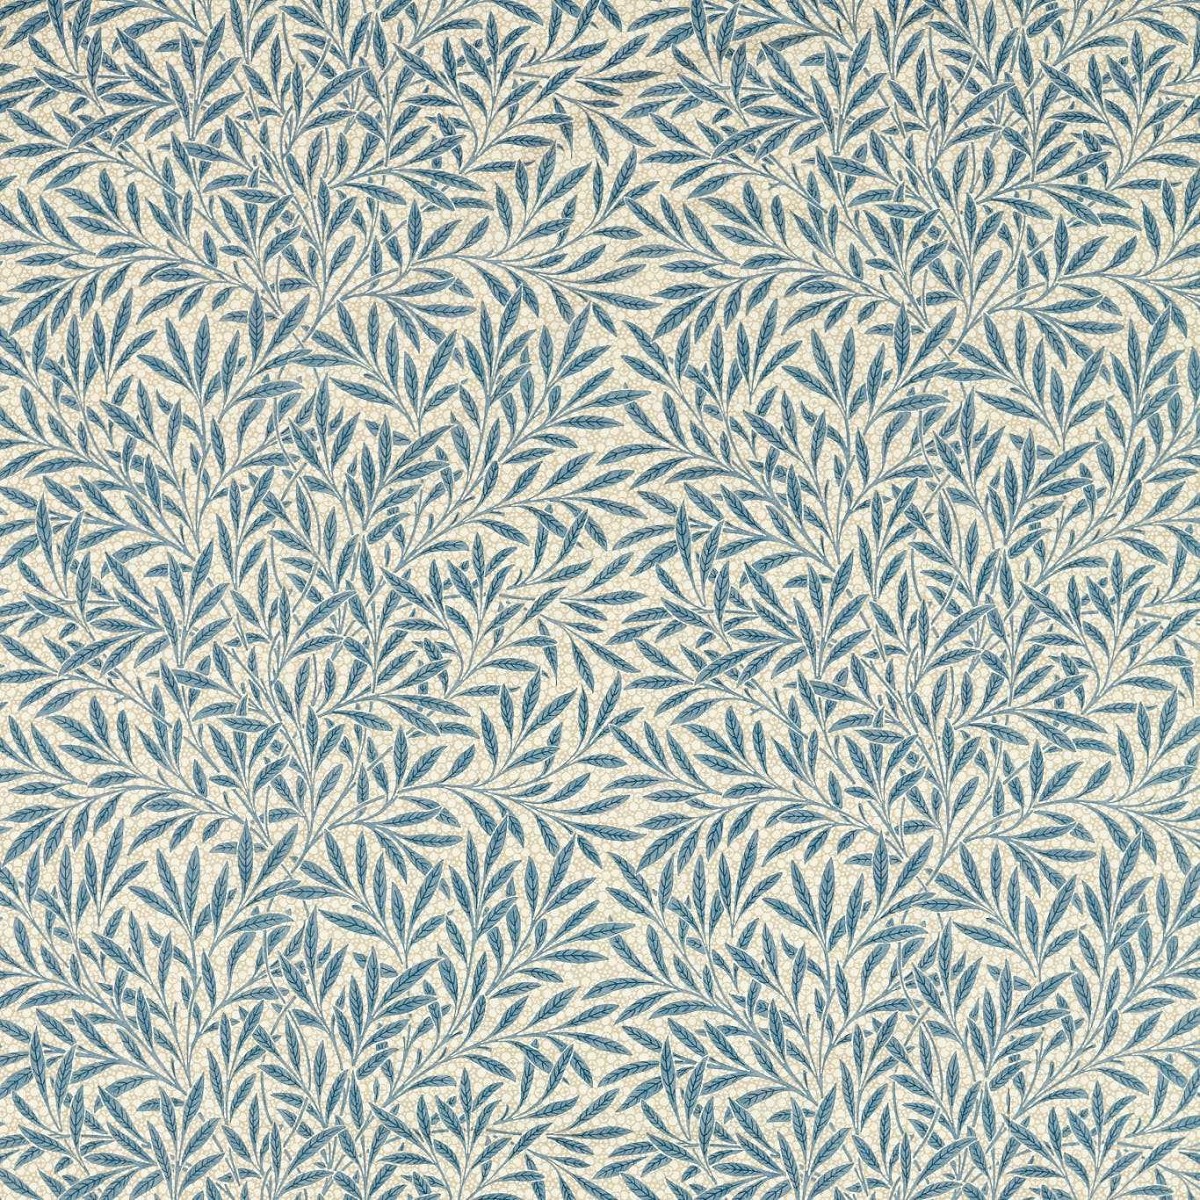 Emerys Willow Woad Blue Fabric by William Morris & Co.